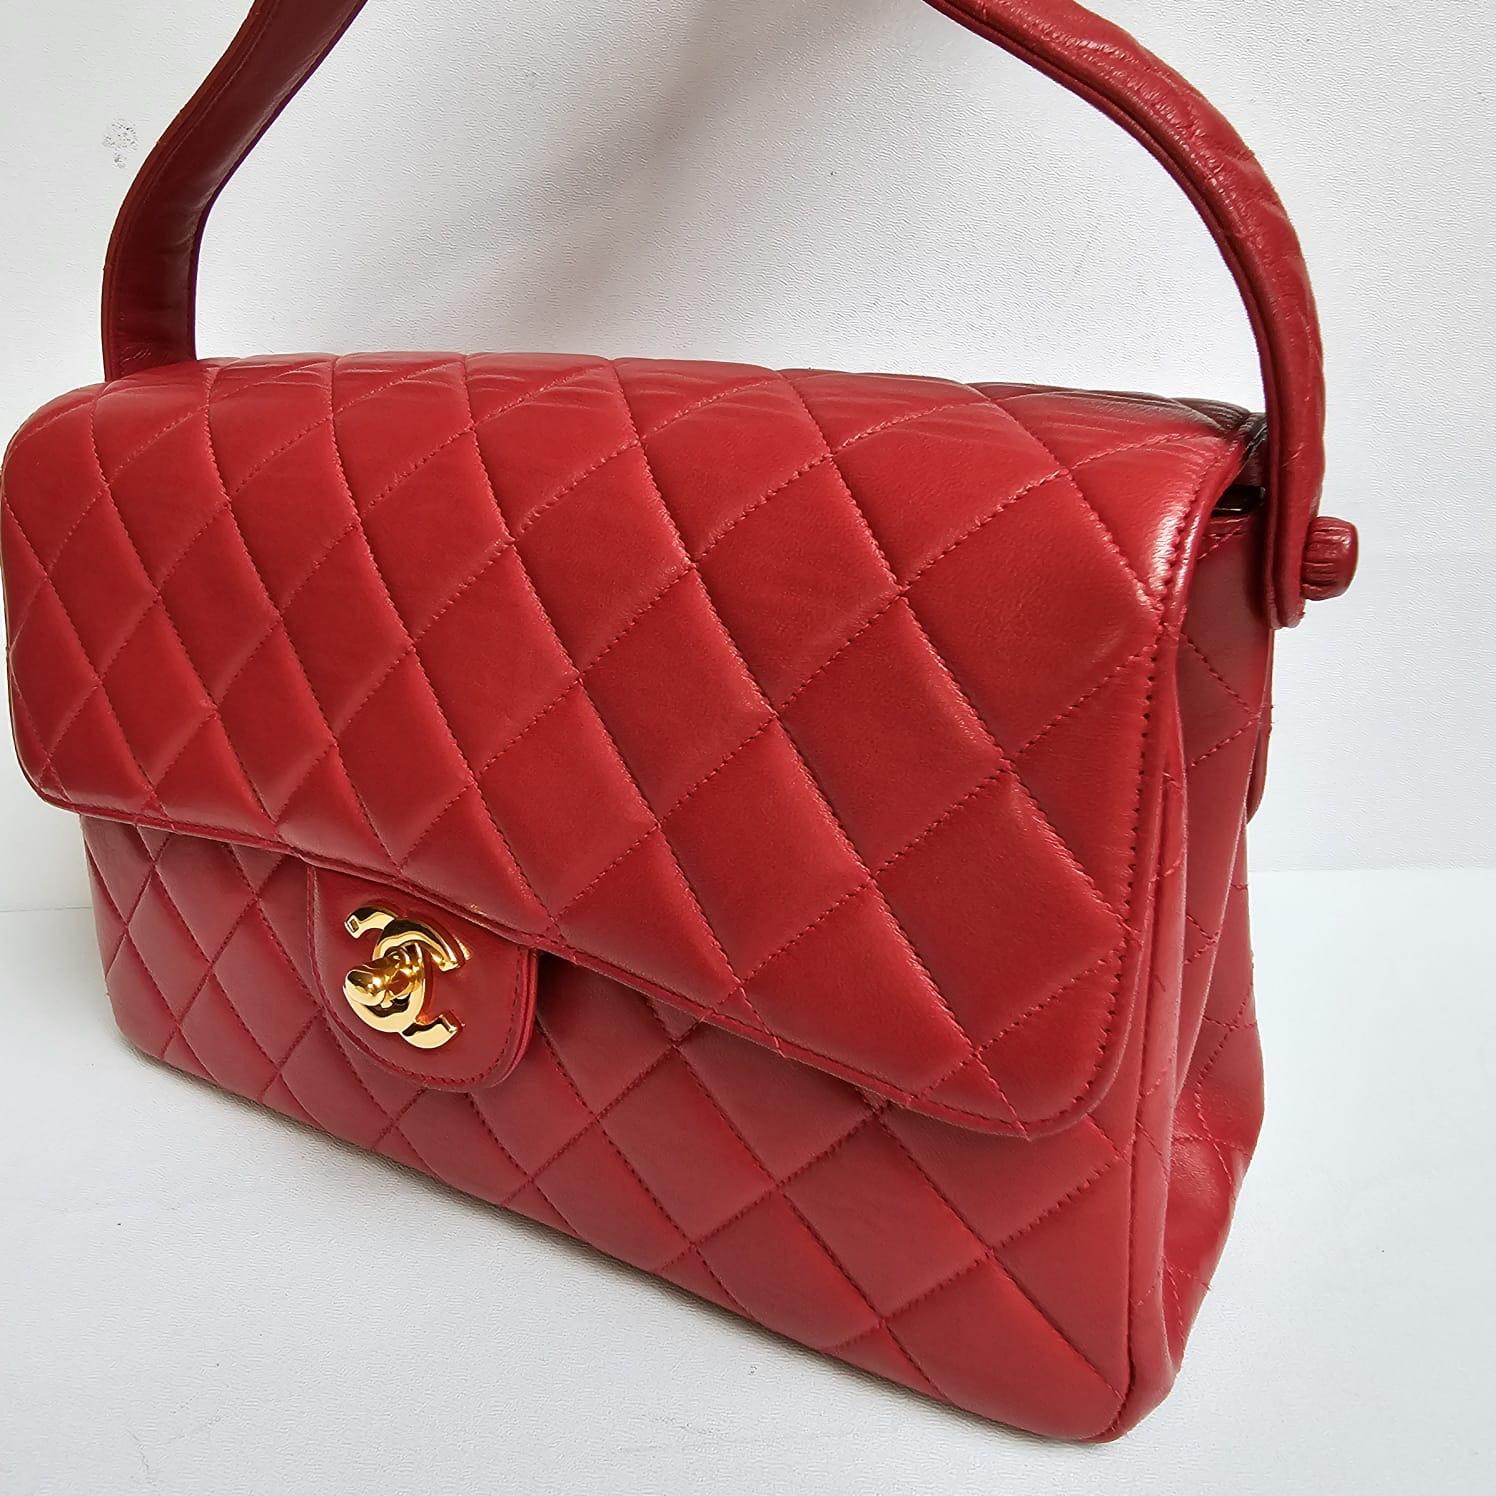 Chanel Vintage Red Lambskin Medium Quilted Double Face Top Handle Bag For Sale 11